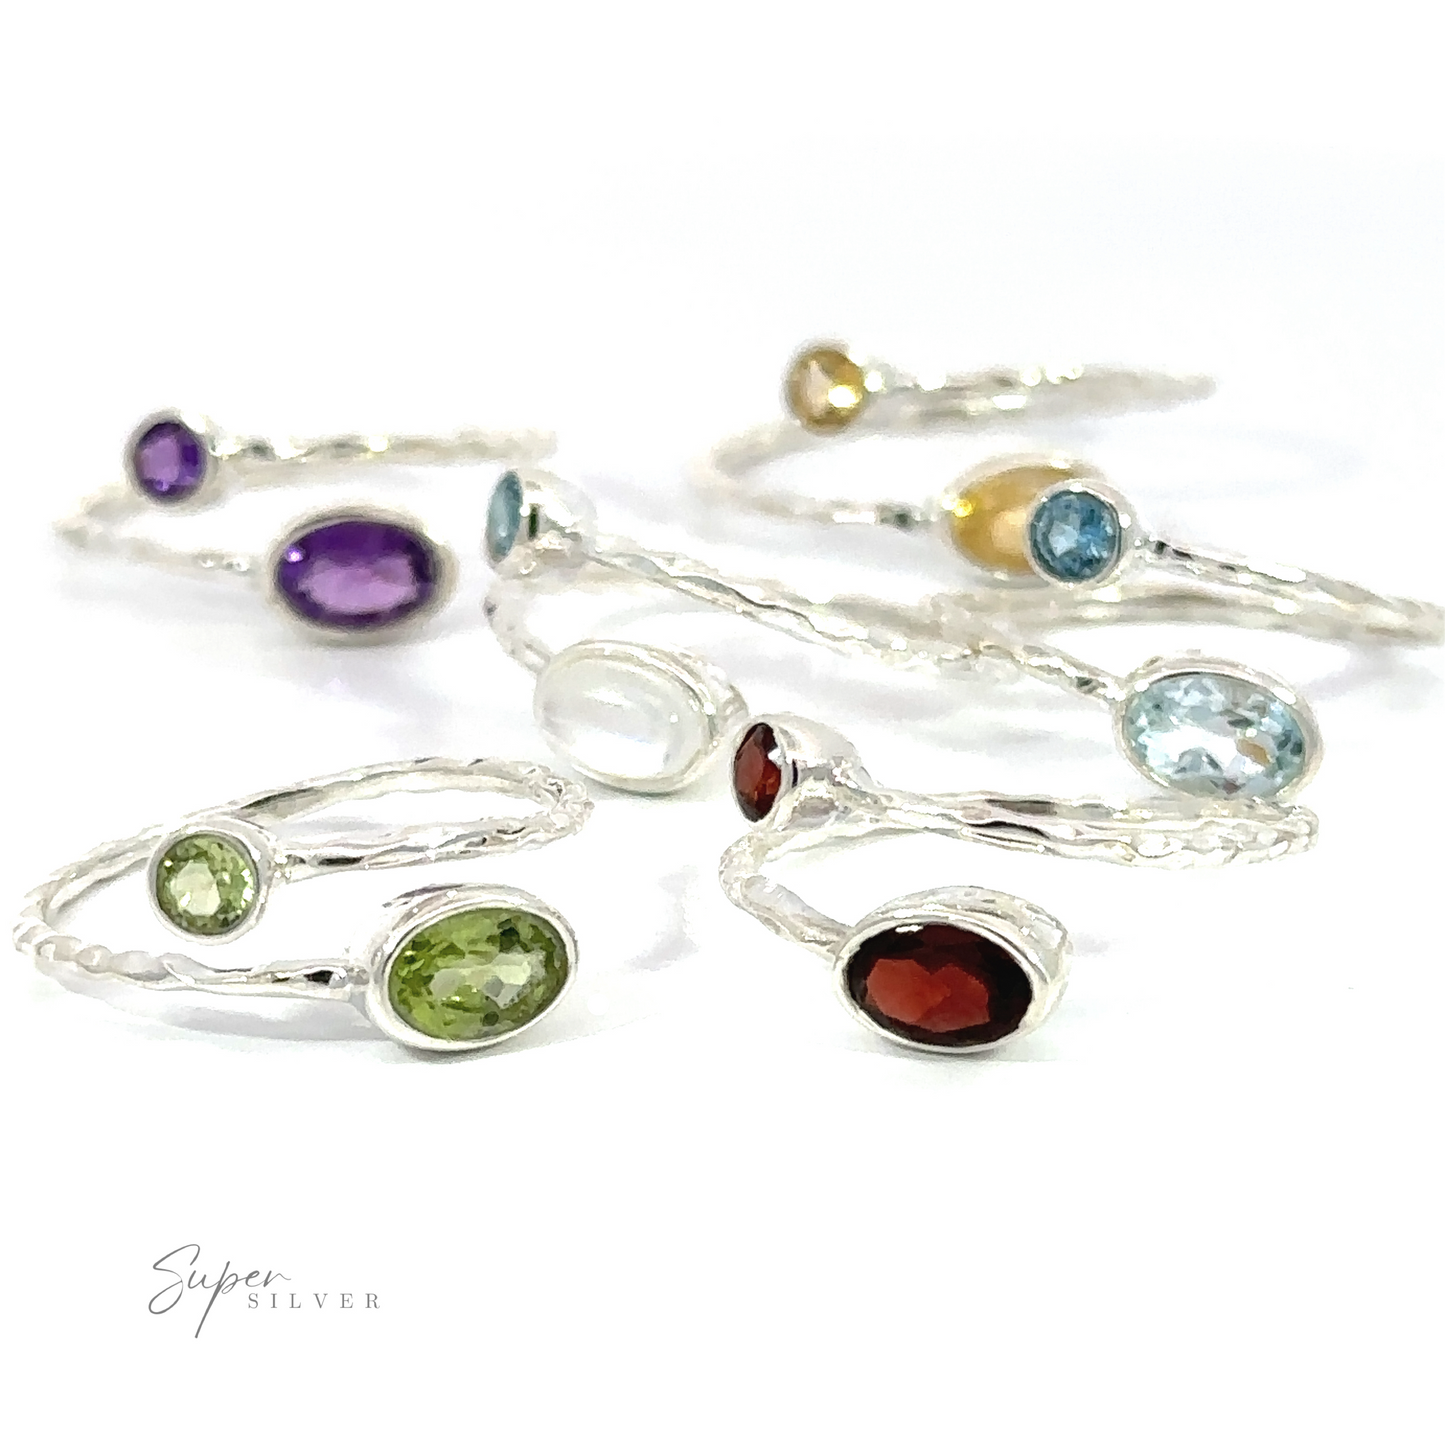 Assorted Textured Adjustable Bands with Adorned Gemstones, displayed against a white background, feature adjustable gemstone settings.